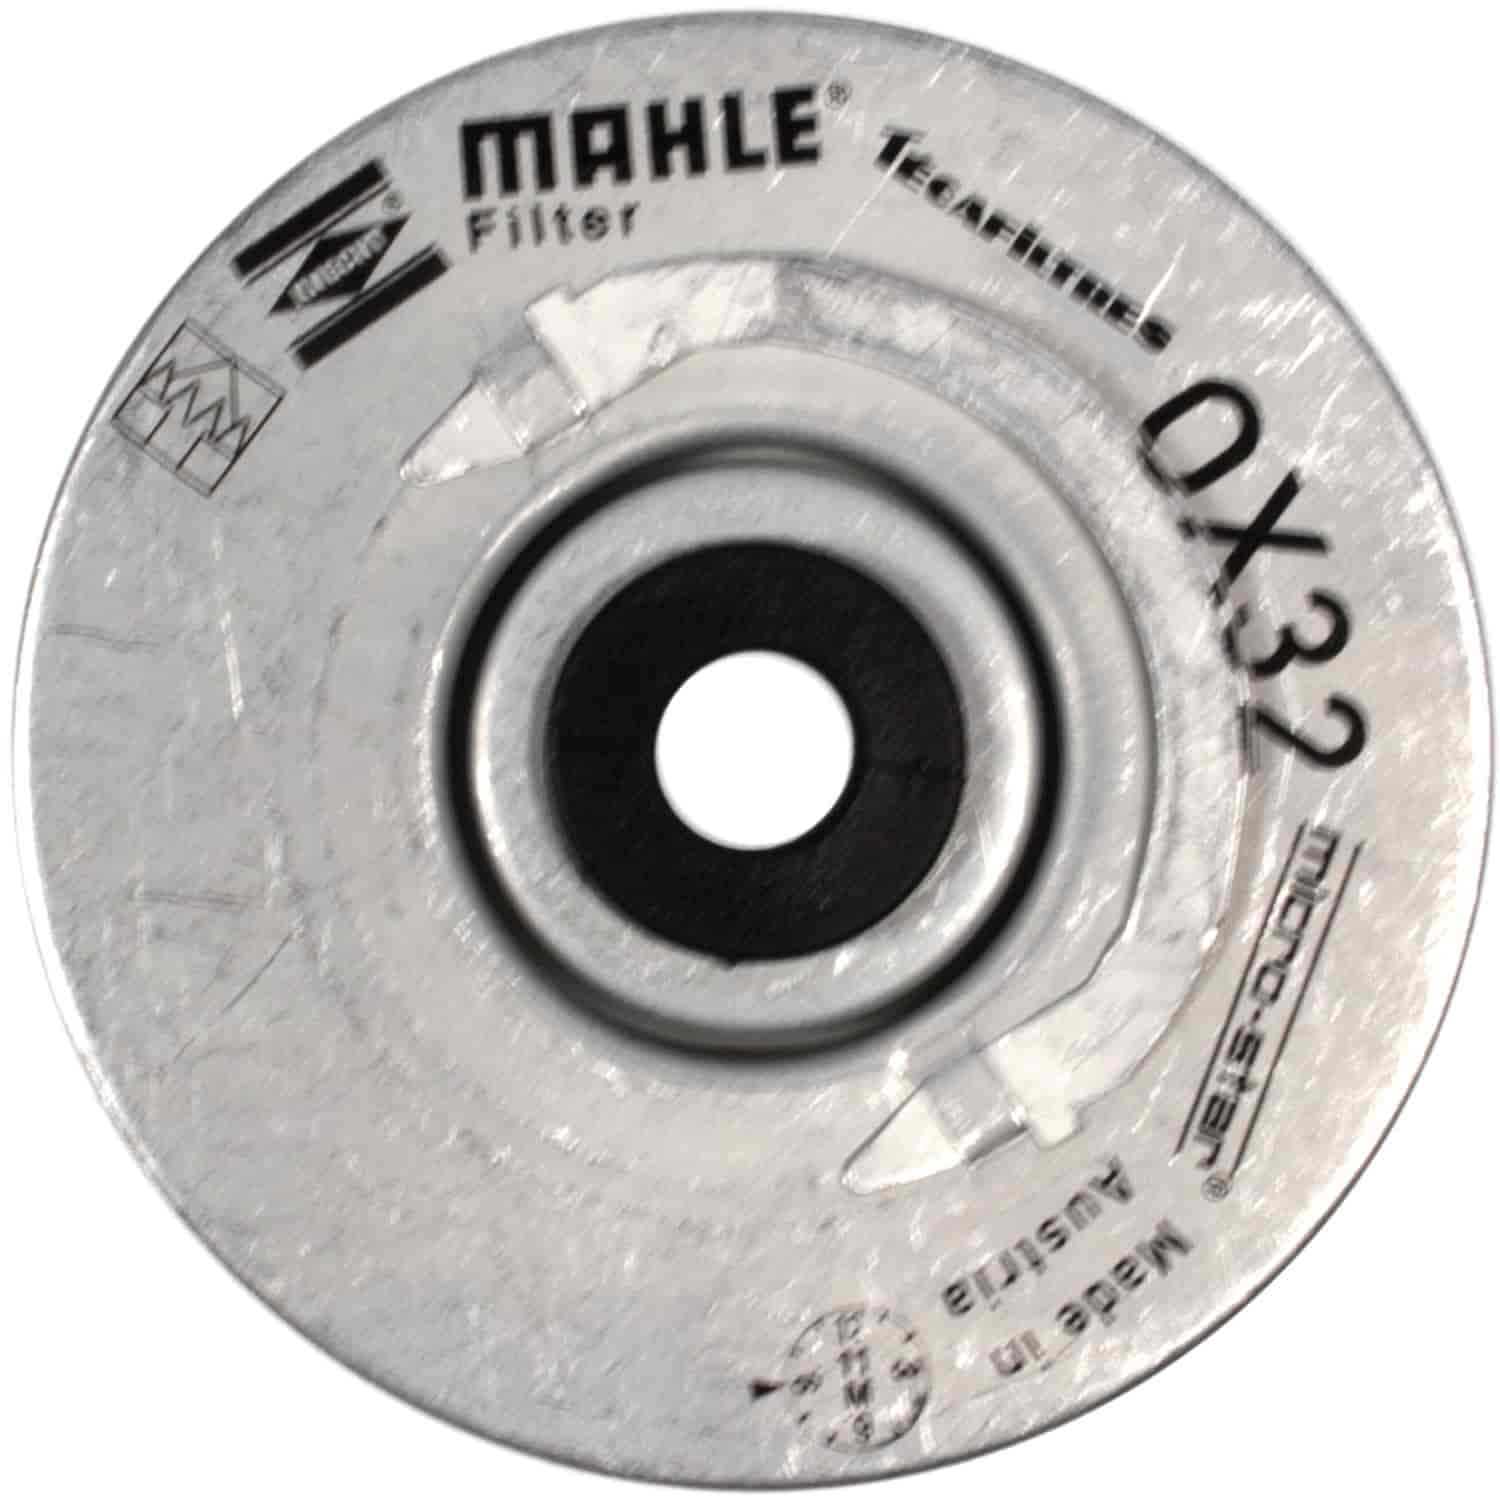 Mahle Oil Filter Mercedes Benz 280SE 280SEL 300 Series 350 Series 420 450 Series